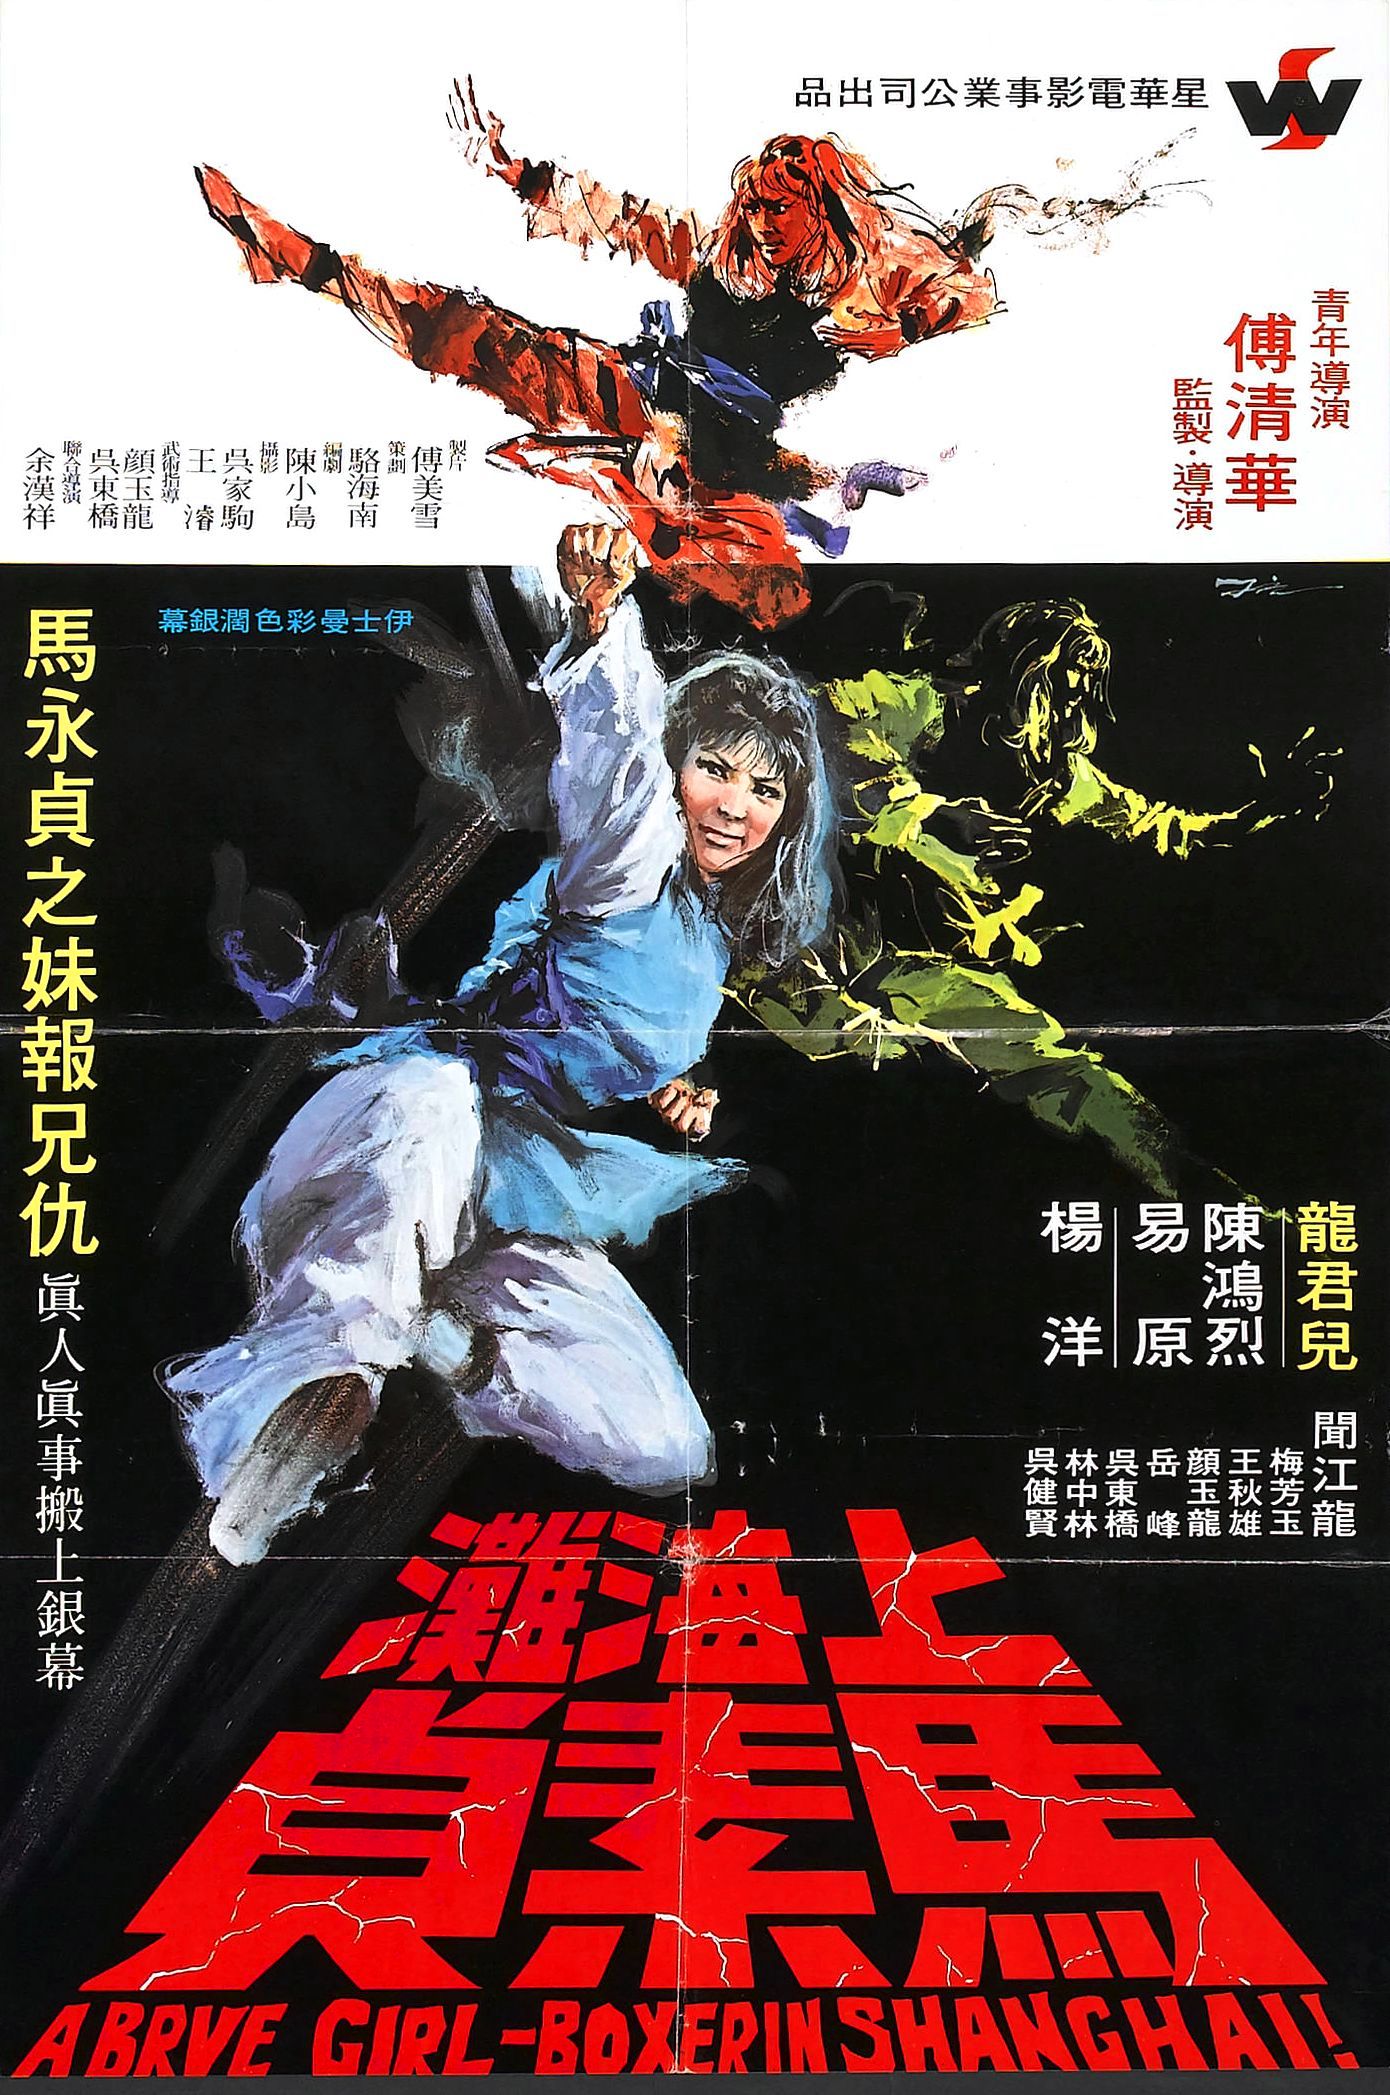 Brave Girl Boxer from Shanghai (1972) with English Subtitles on DVD on DVD